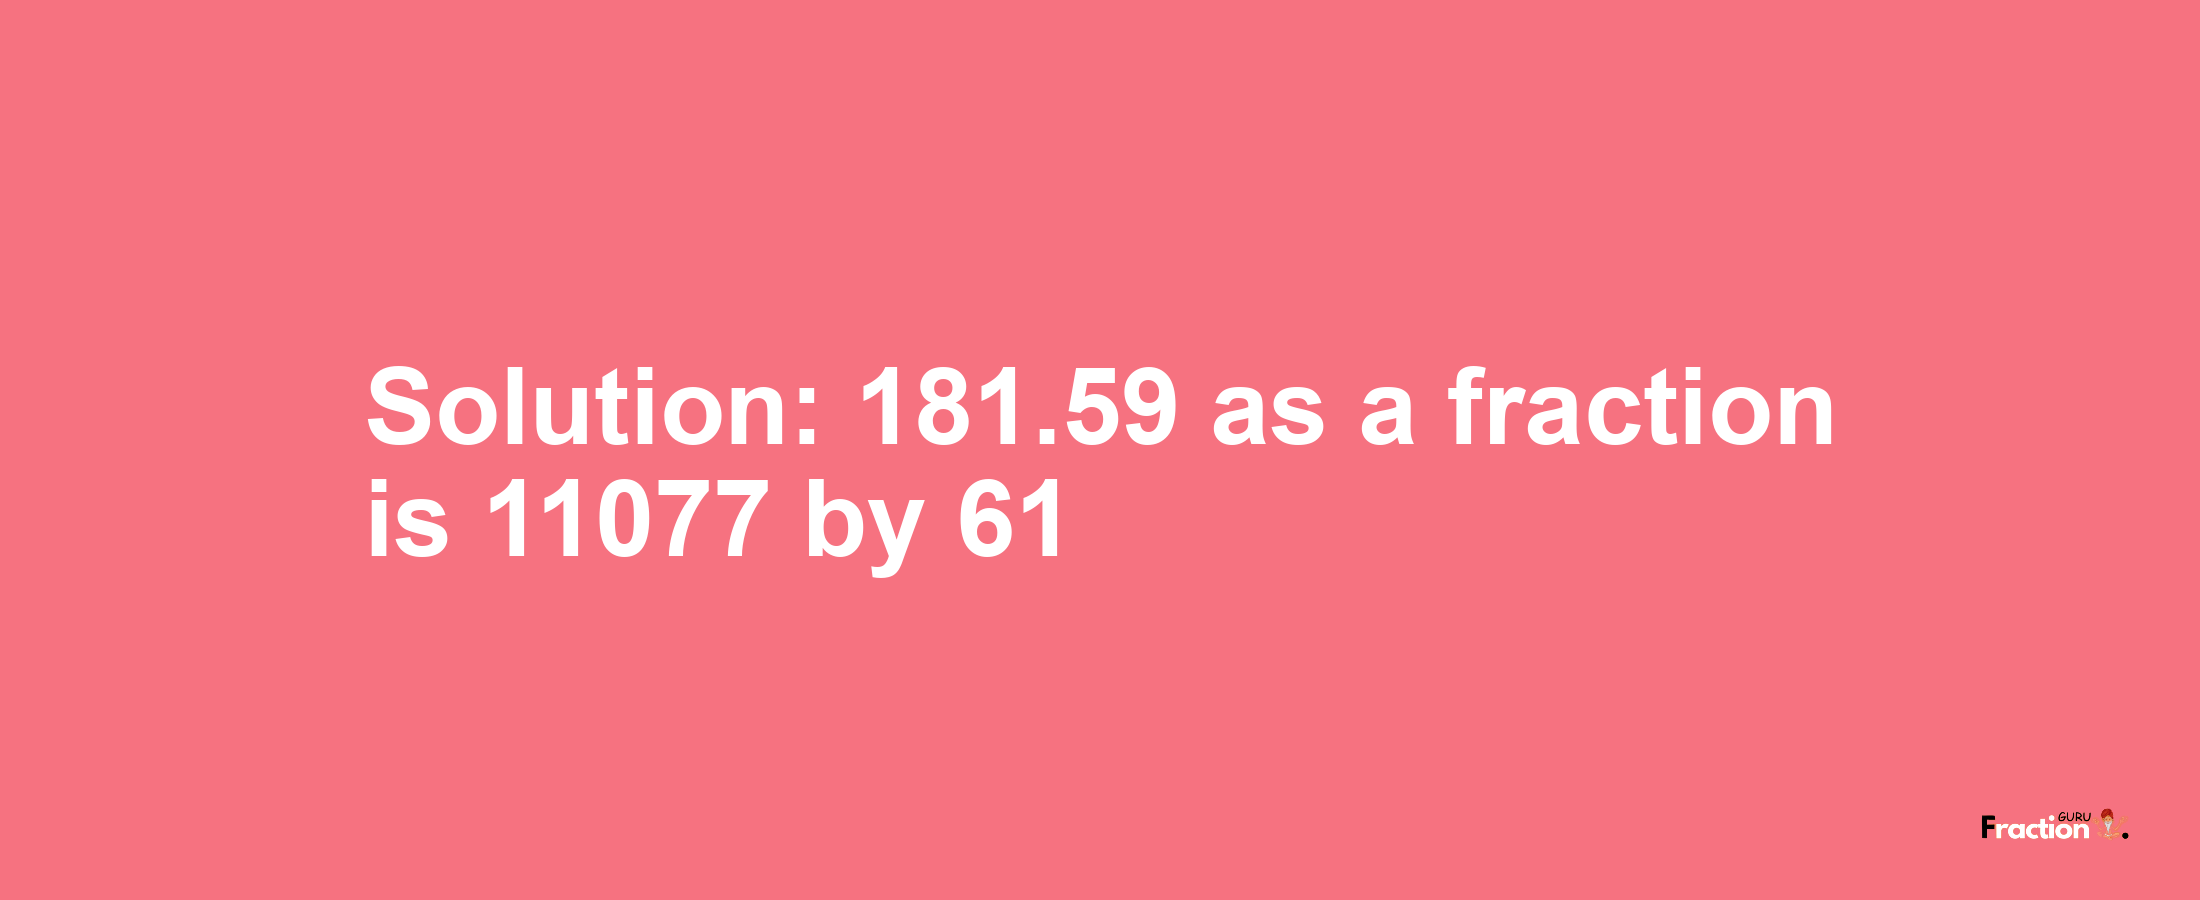 Solution:181.59 as a fraction is 11077/61